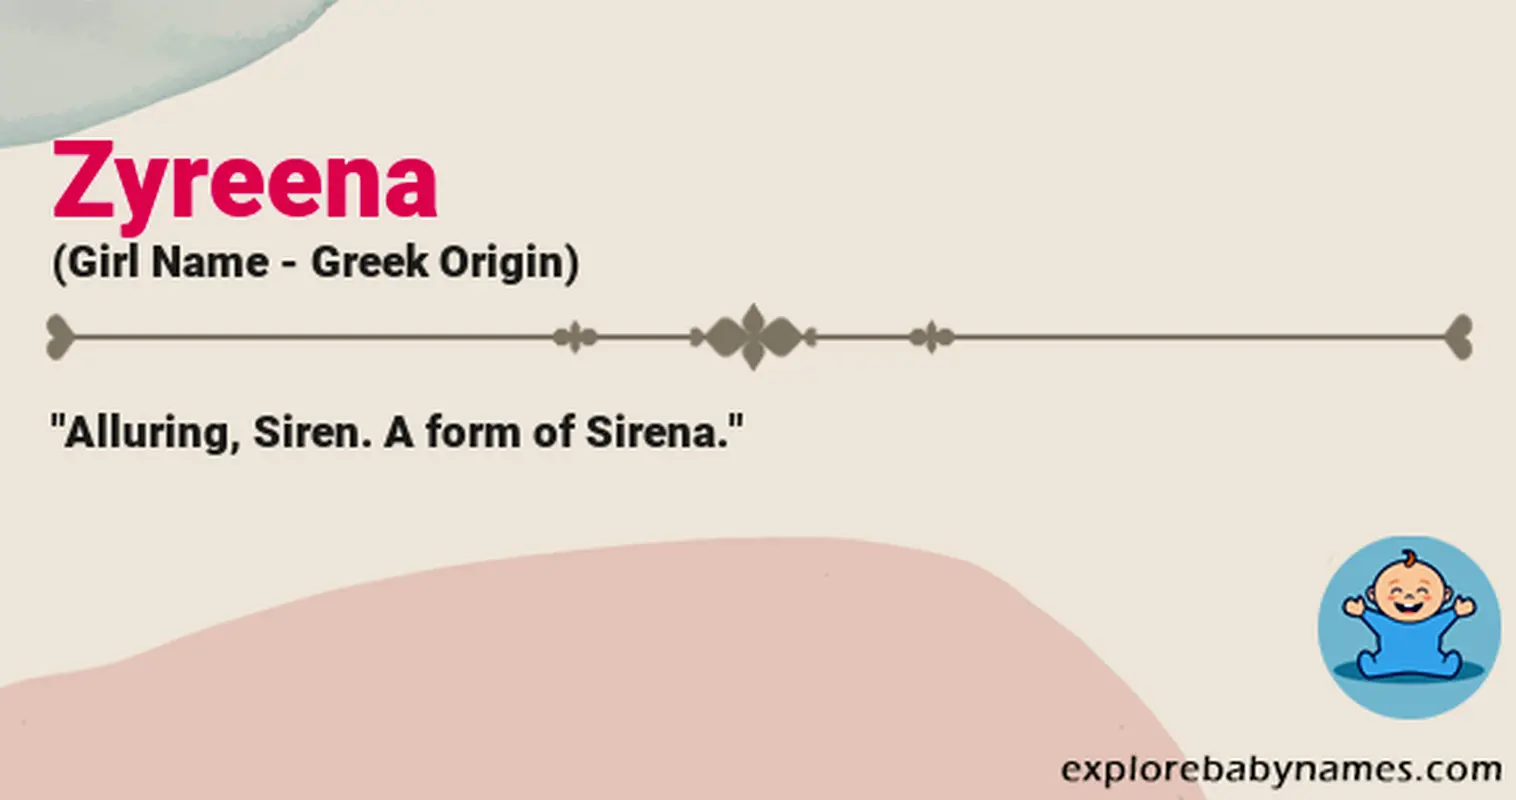 Meaning of Zyreena